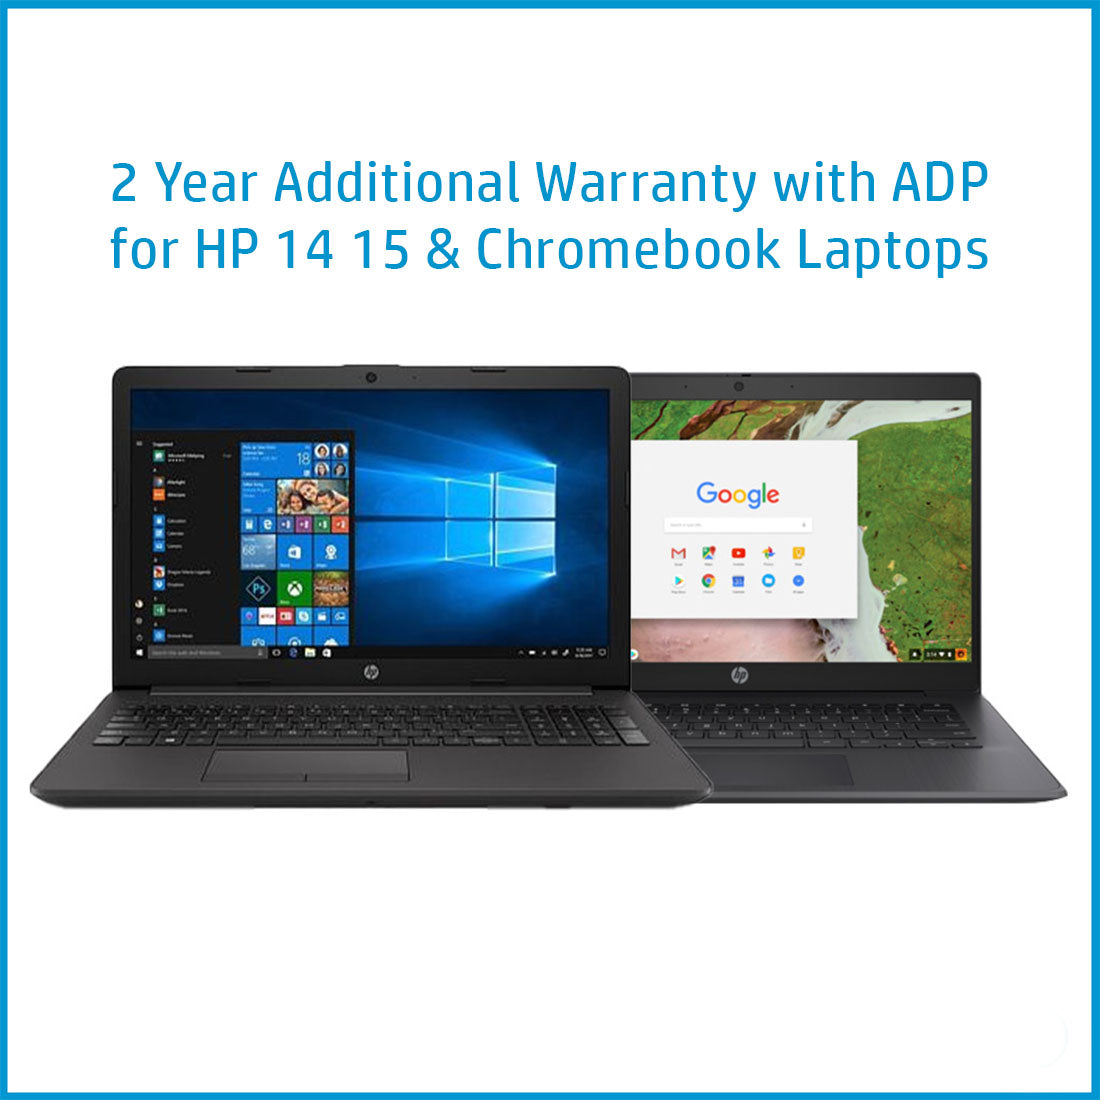 hp-care-pack-for-2-years-additional-warranty-with-adp-for-14-15-series